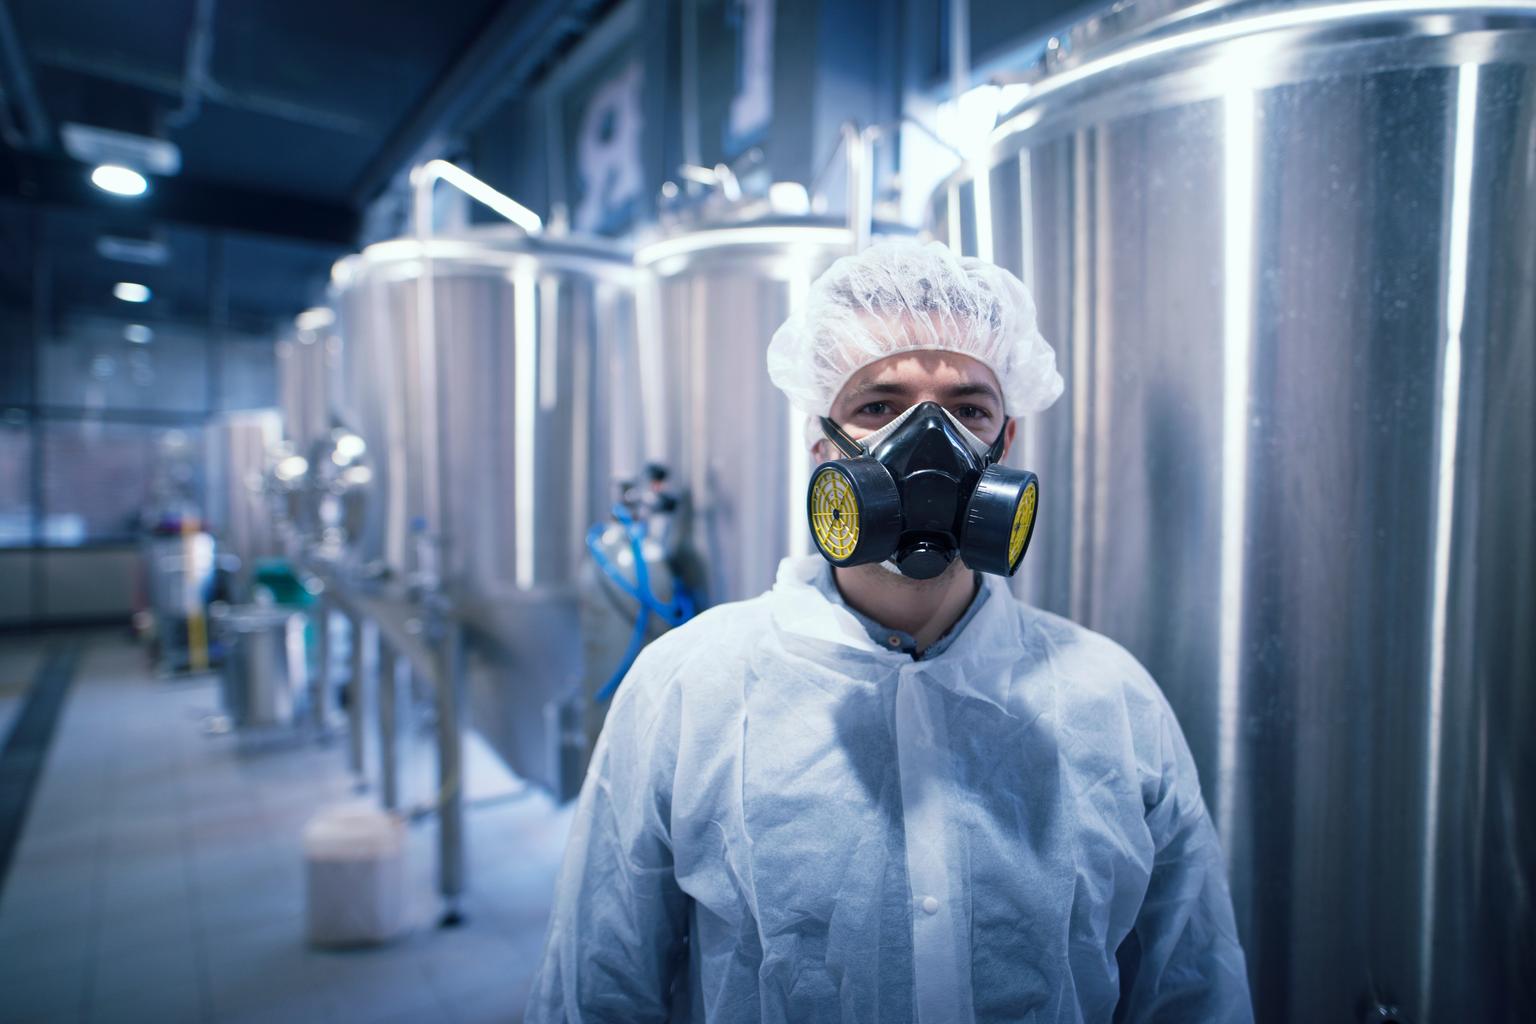 Portrait of industrial worker technologist wearing hazmat suit in production plant. Man in white protective uniform with hairnet and protective mask handling hazardous chemicals.